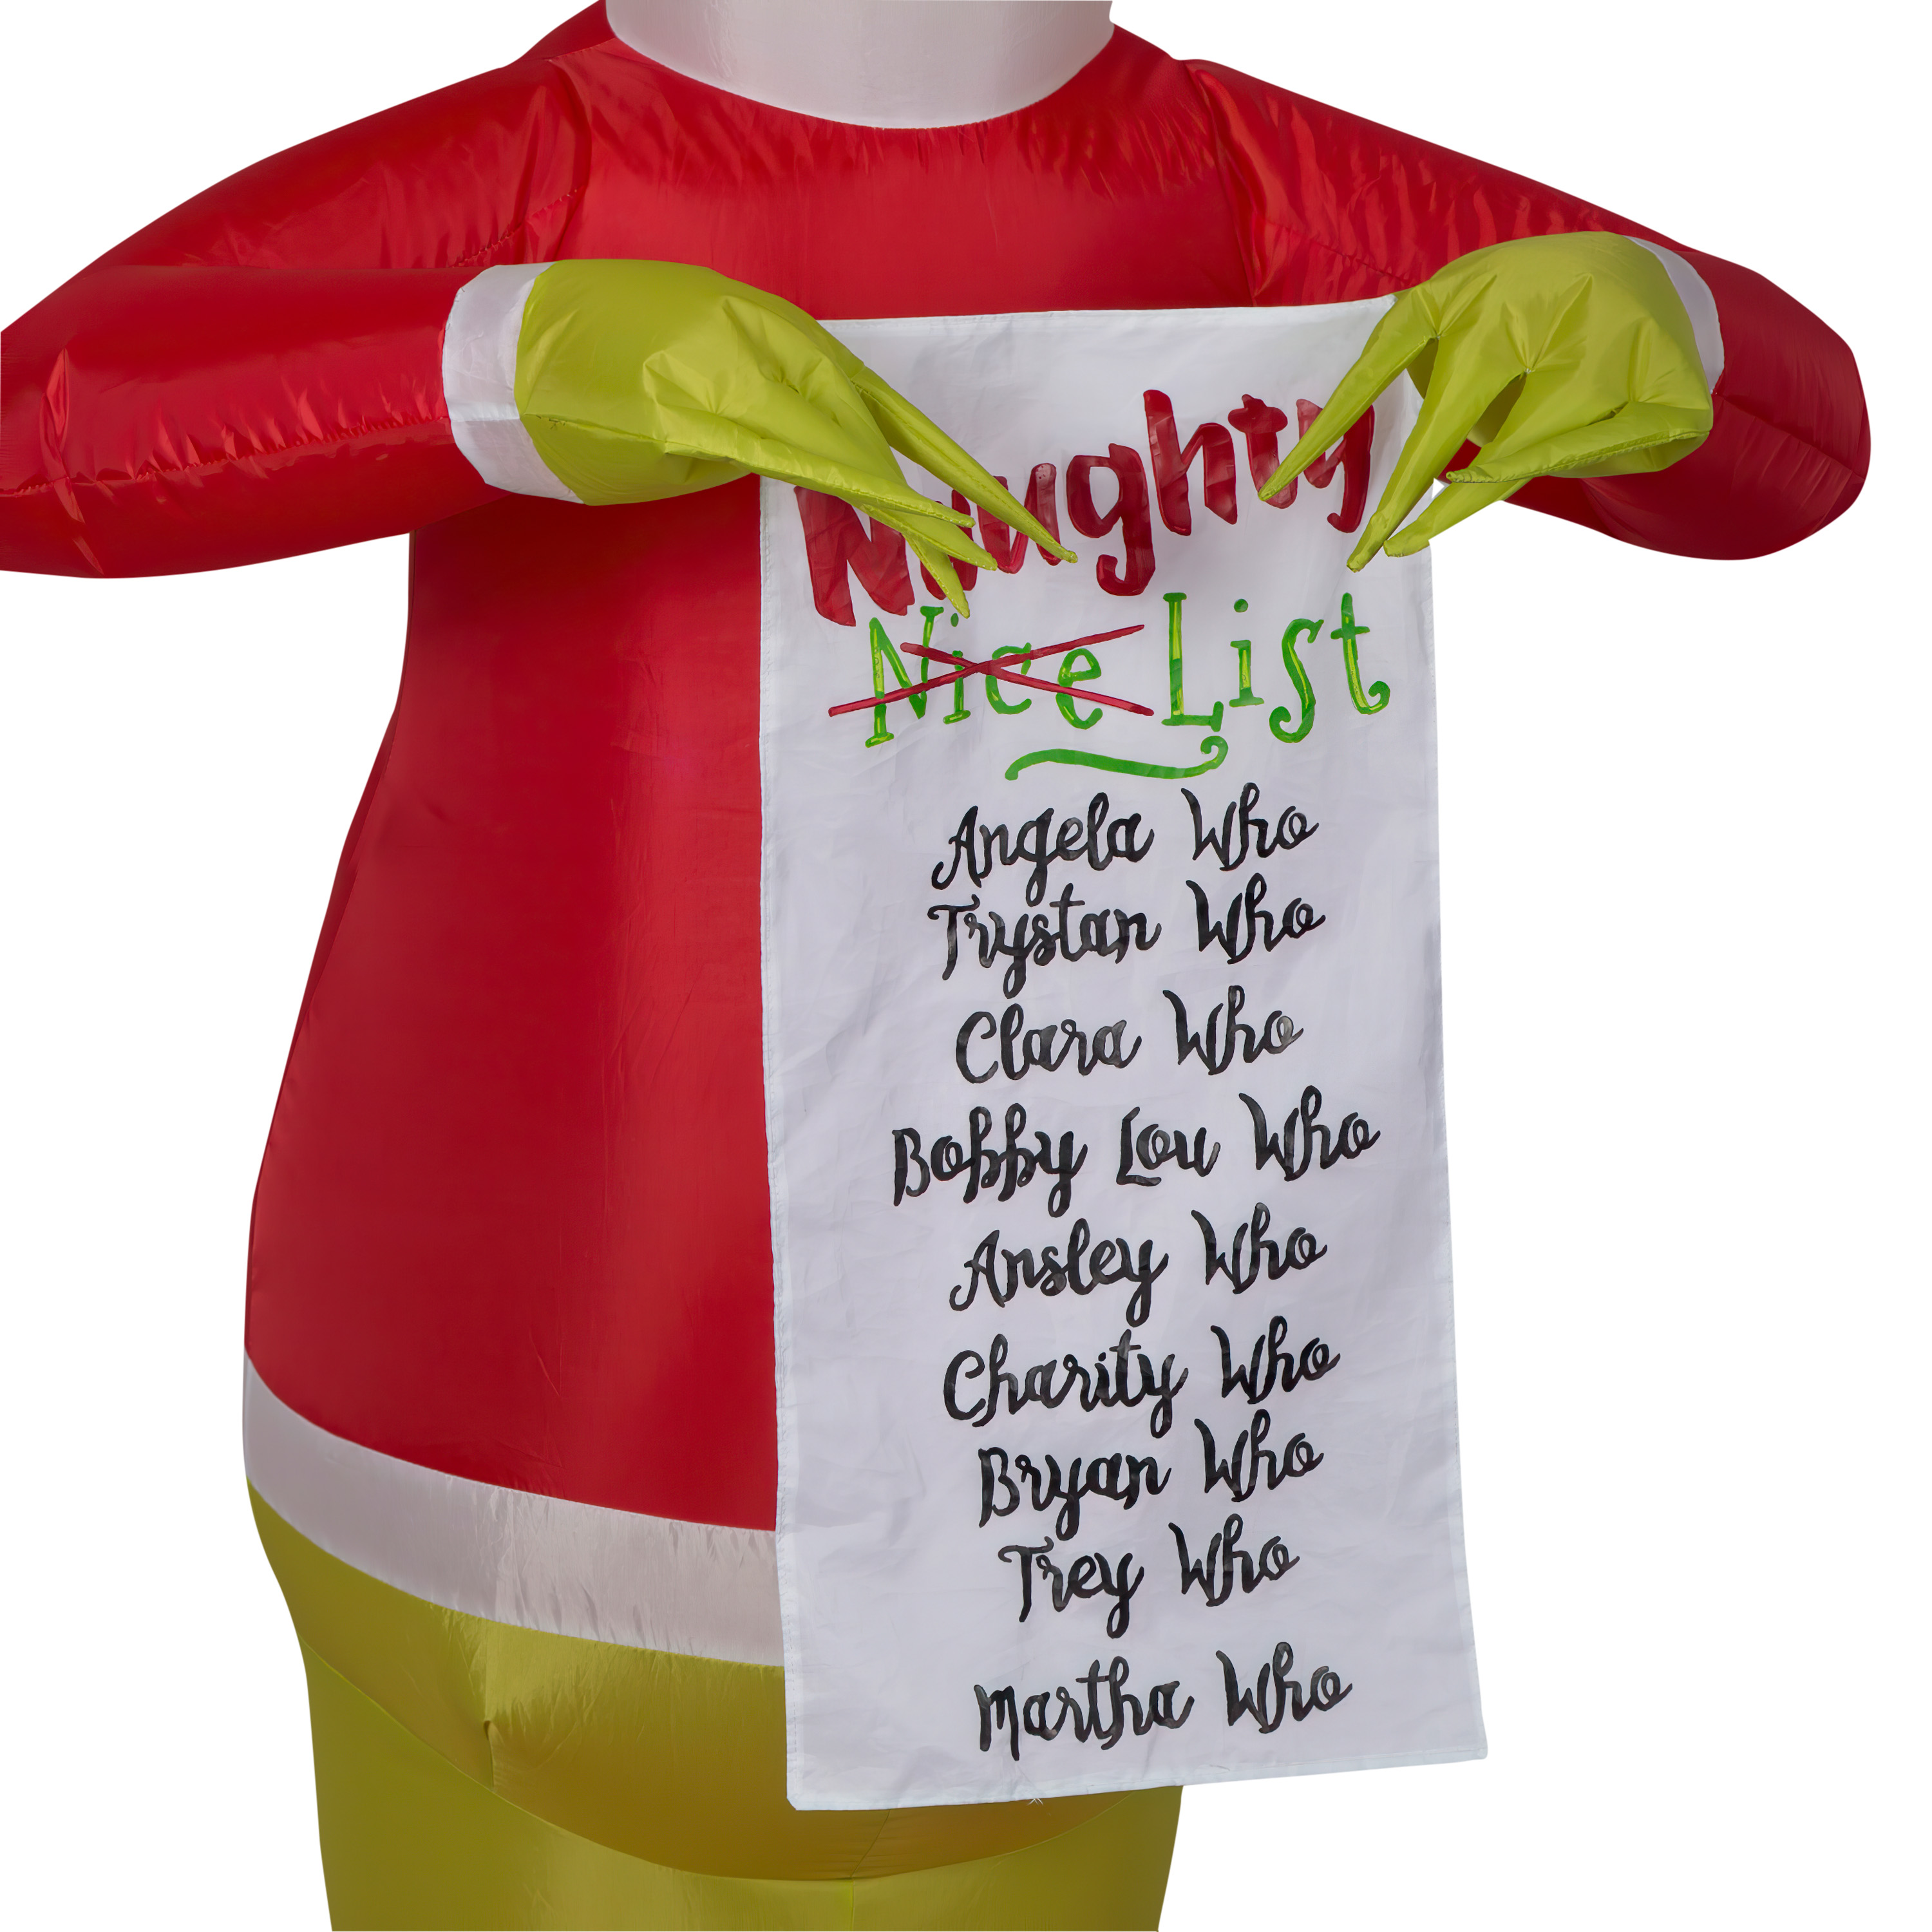 Dr. Seuss The Grinch Naughty List 5.5ft tall by Gemmy Industries - image 4 of 6